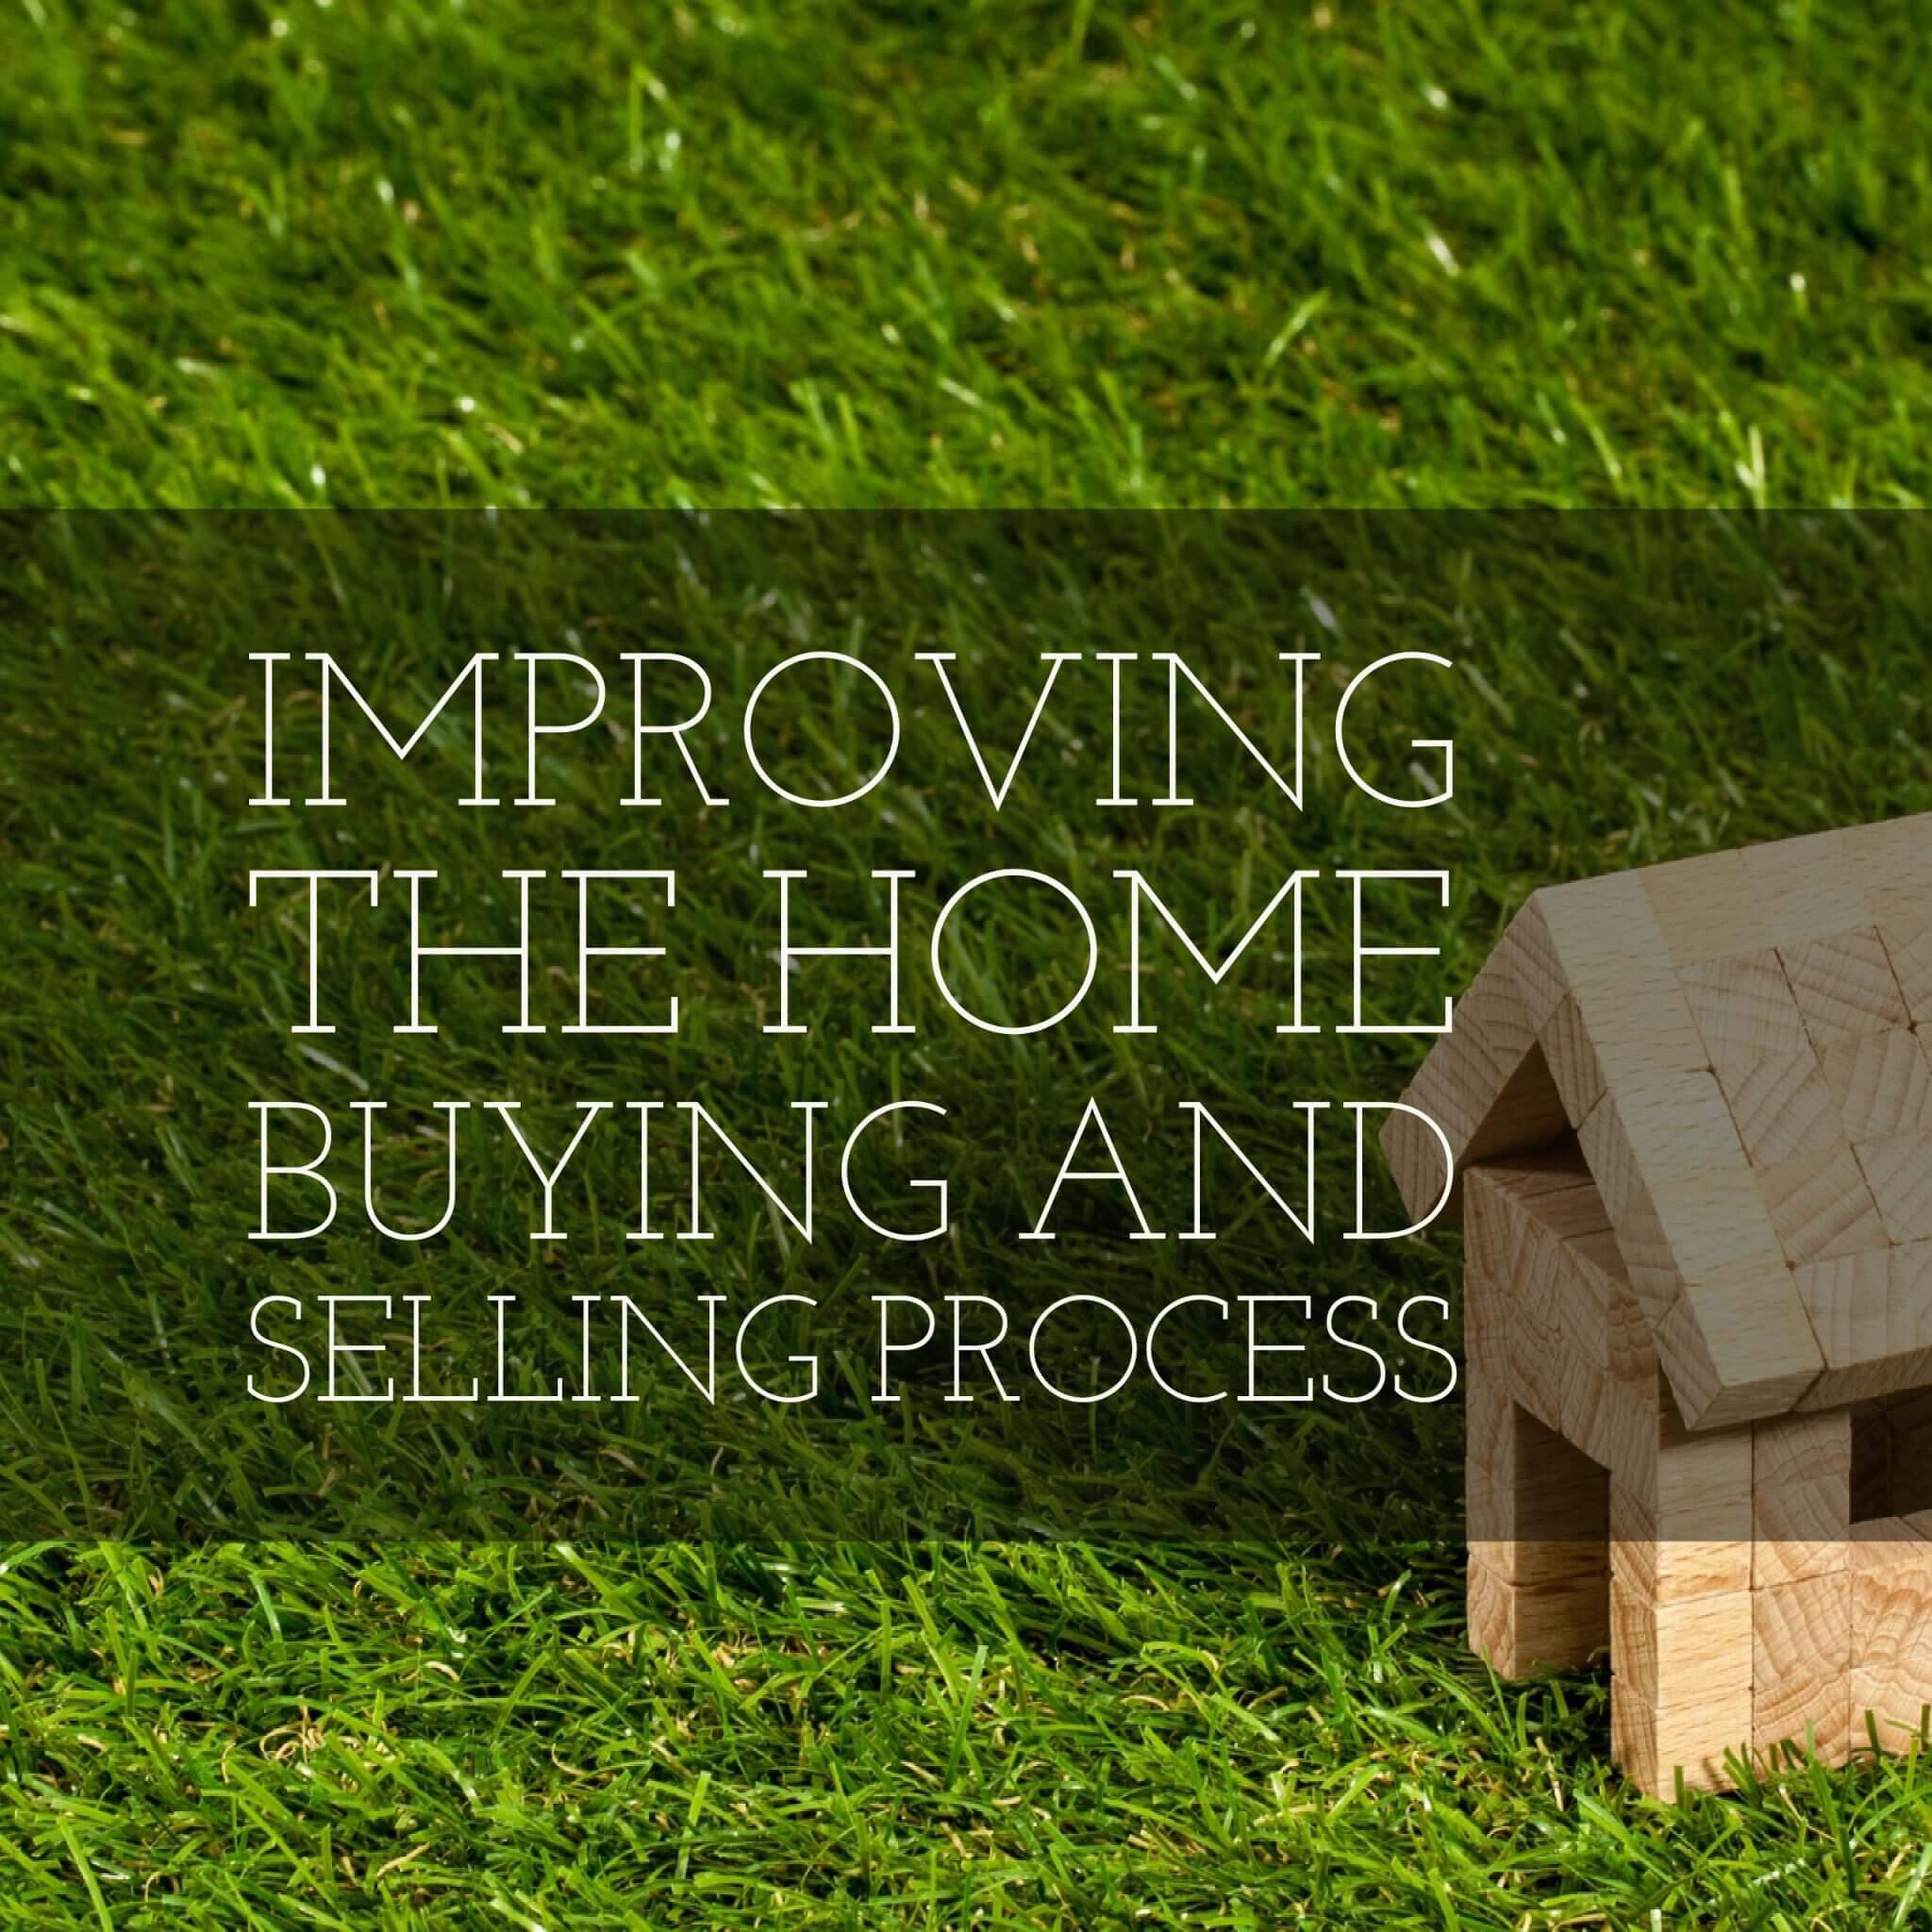 Improving the Buying and Selling Process